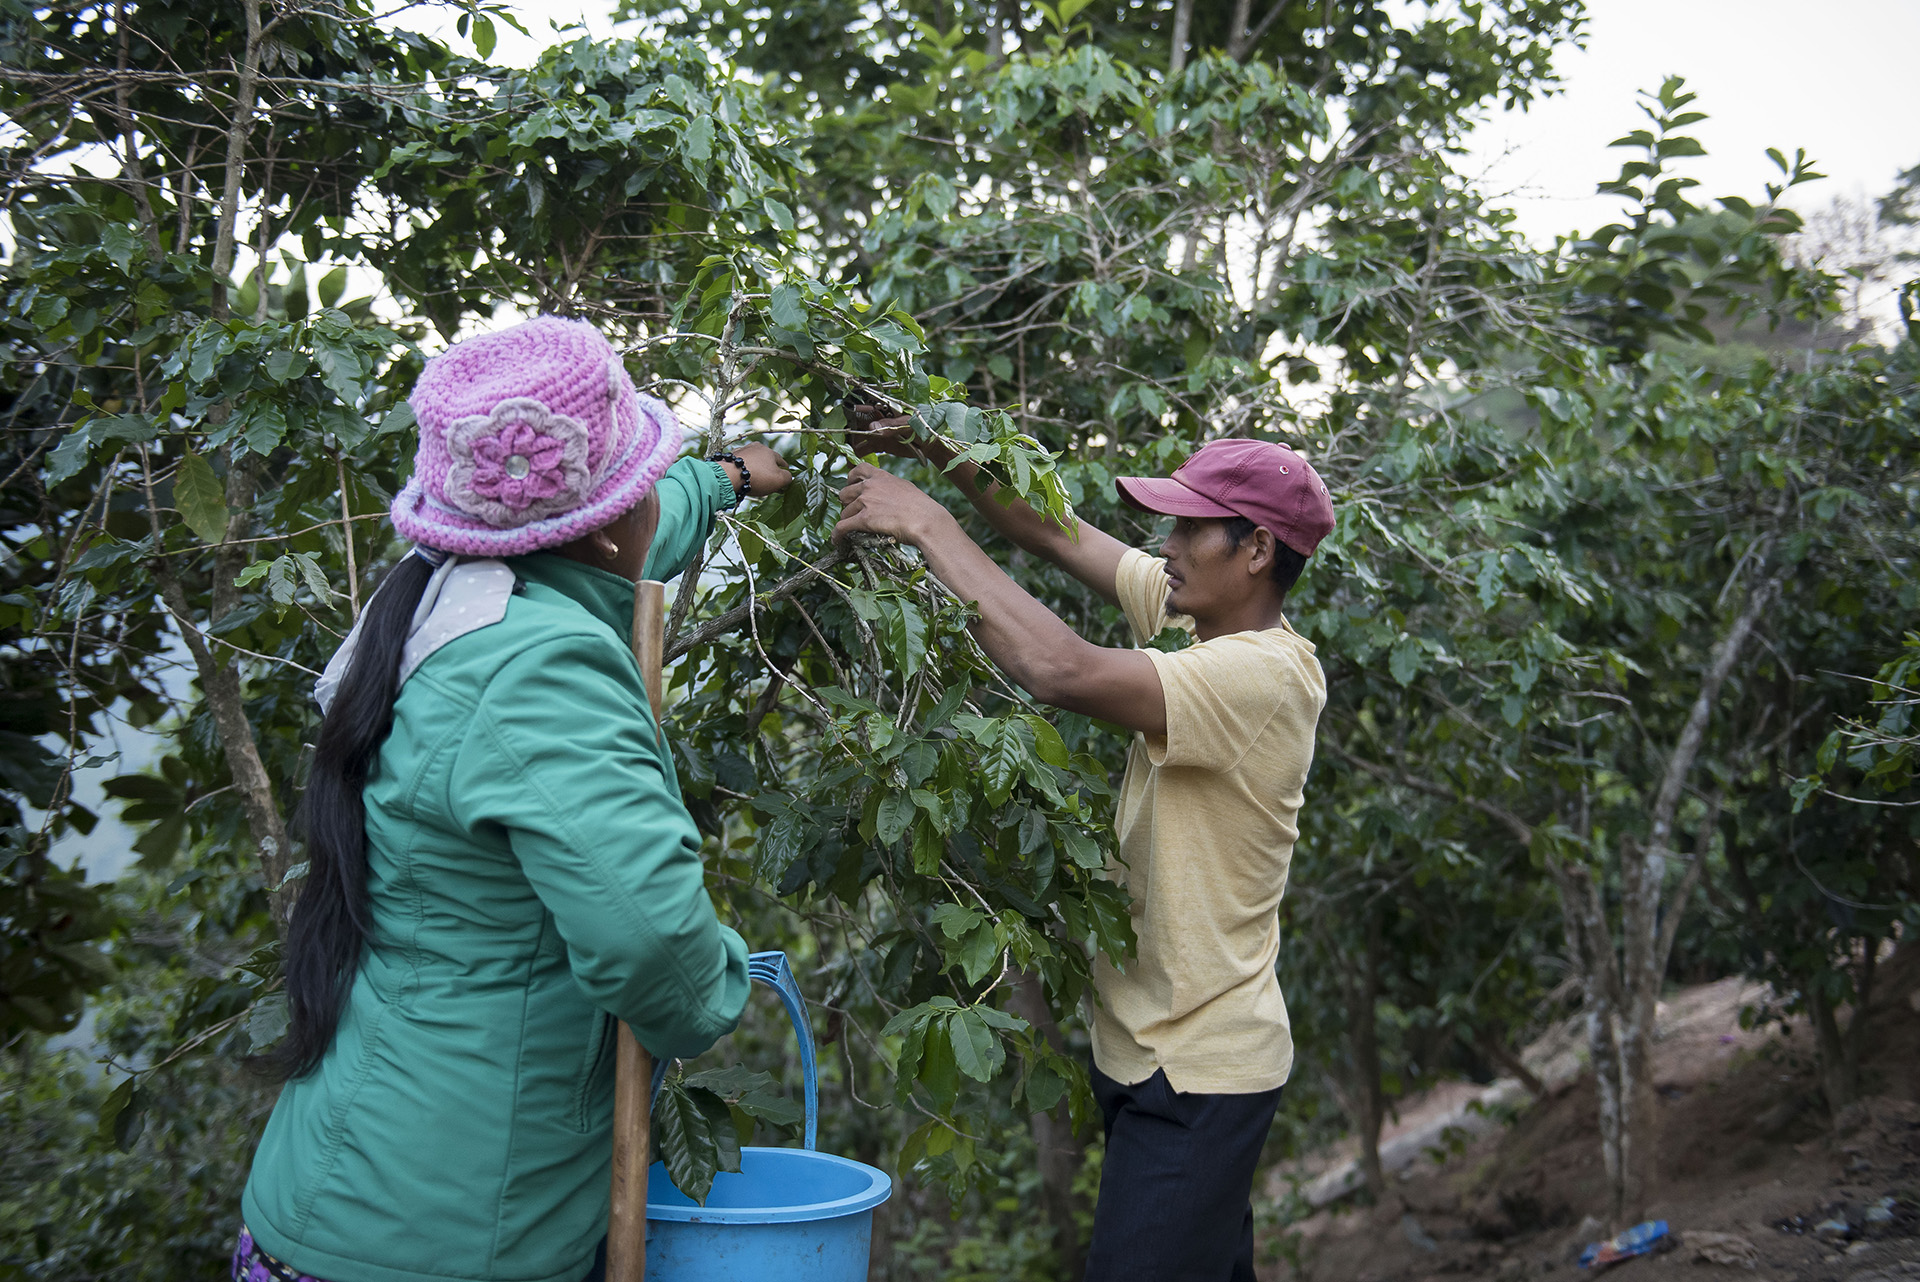 Smallholder coffee farmers in Lam Dong Province, Viet Nam